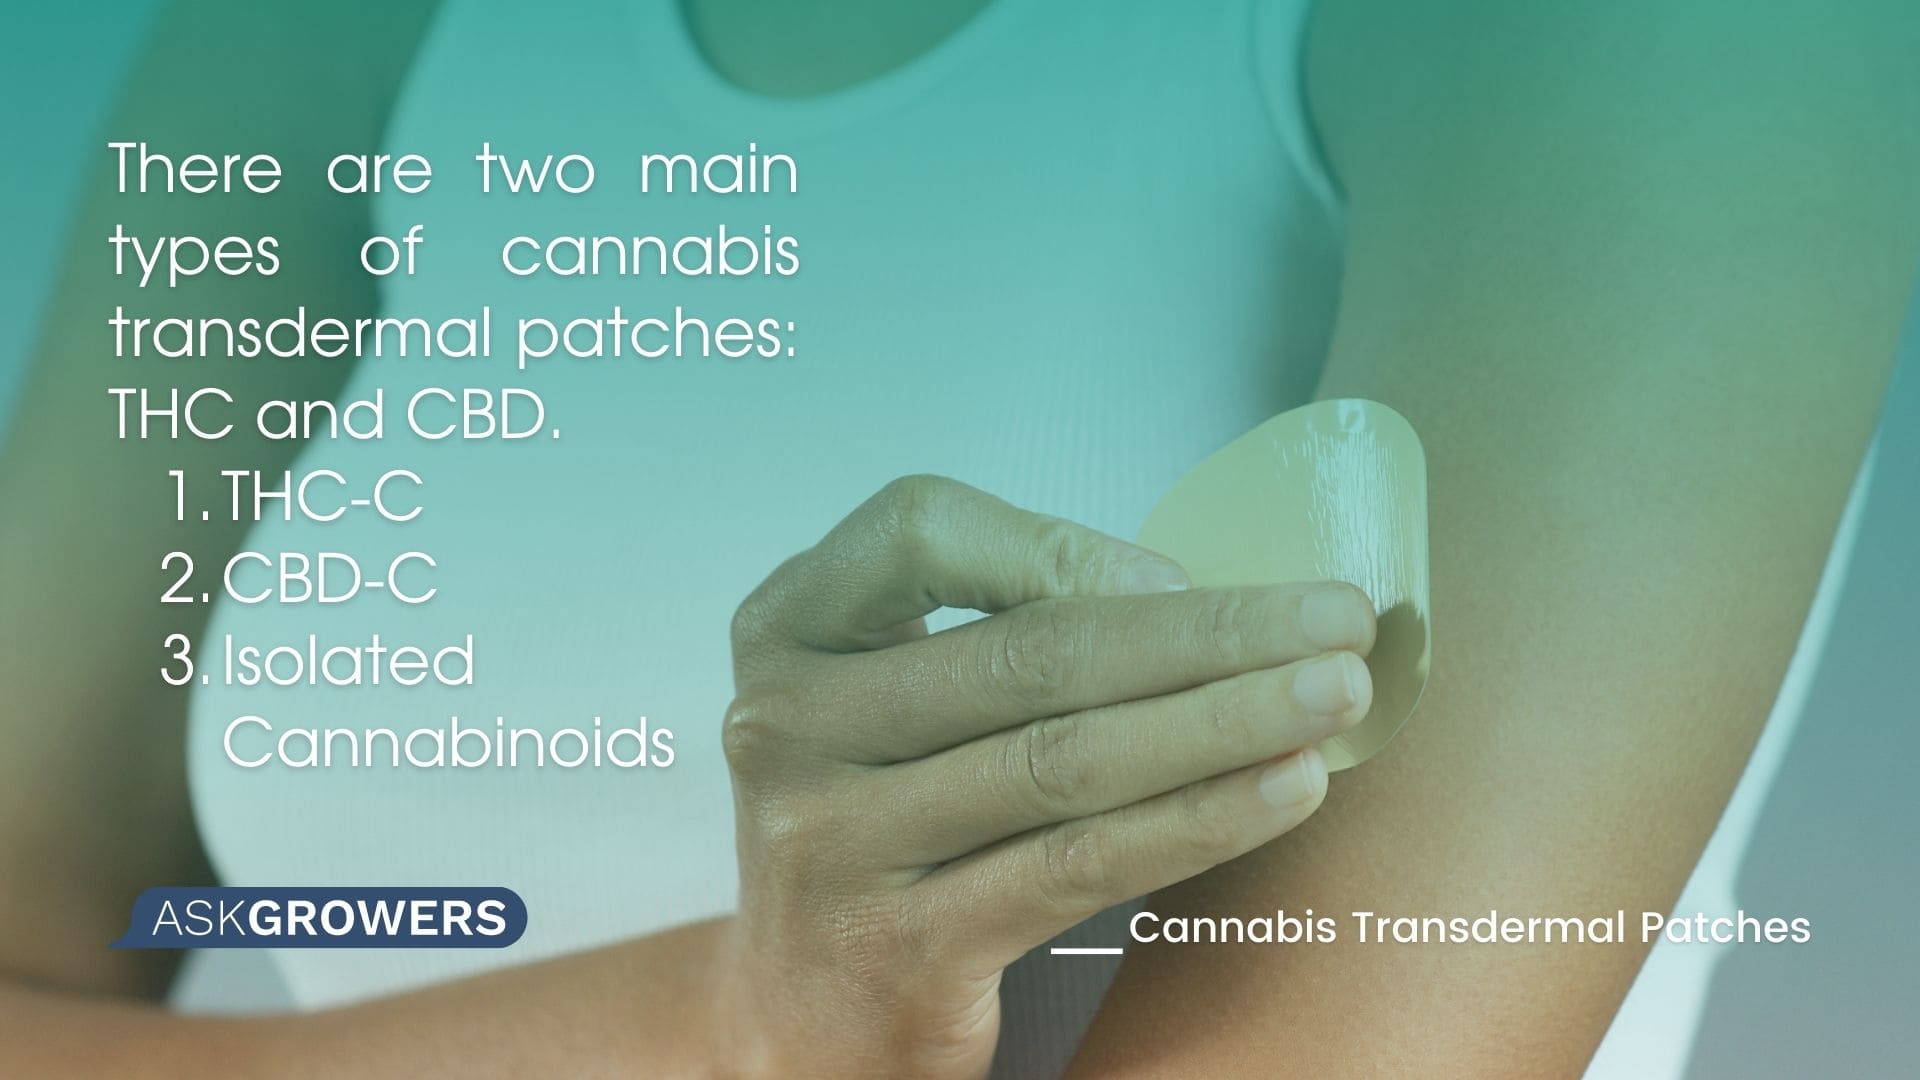 Types of Transdermal Cannabis Patches